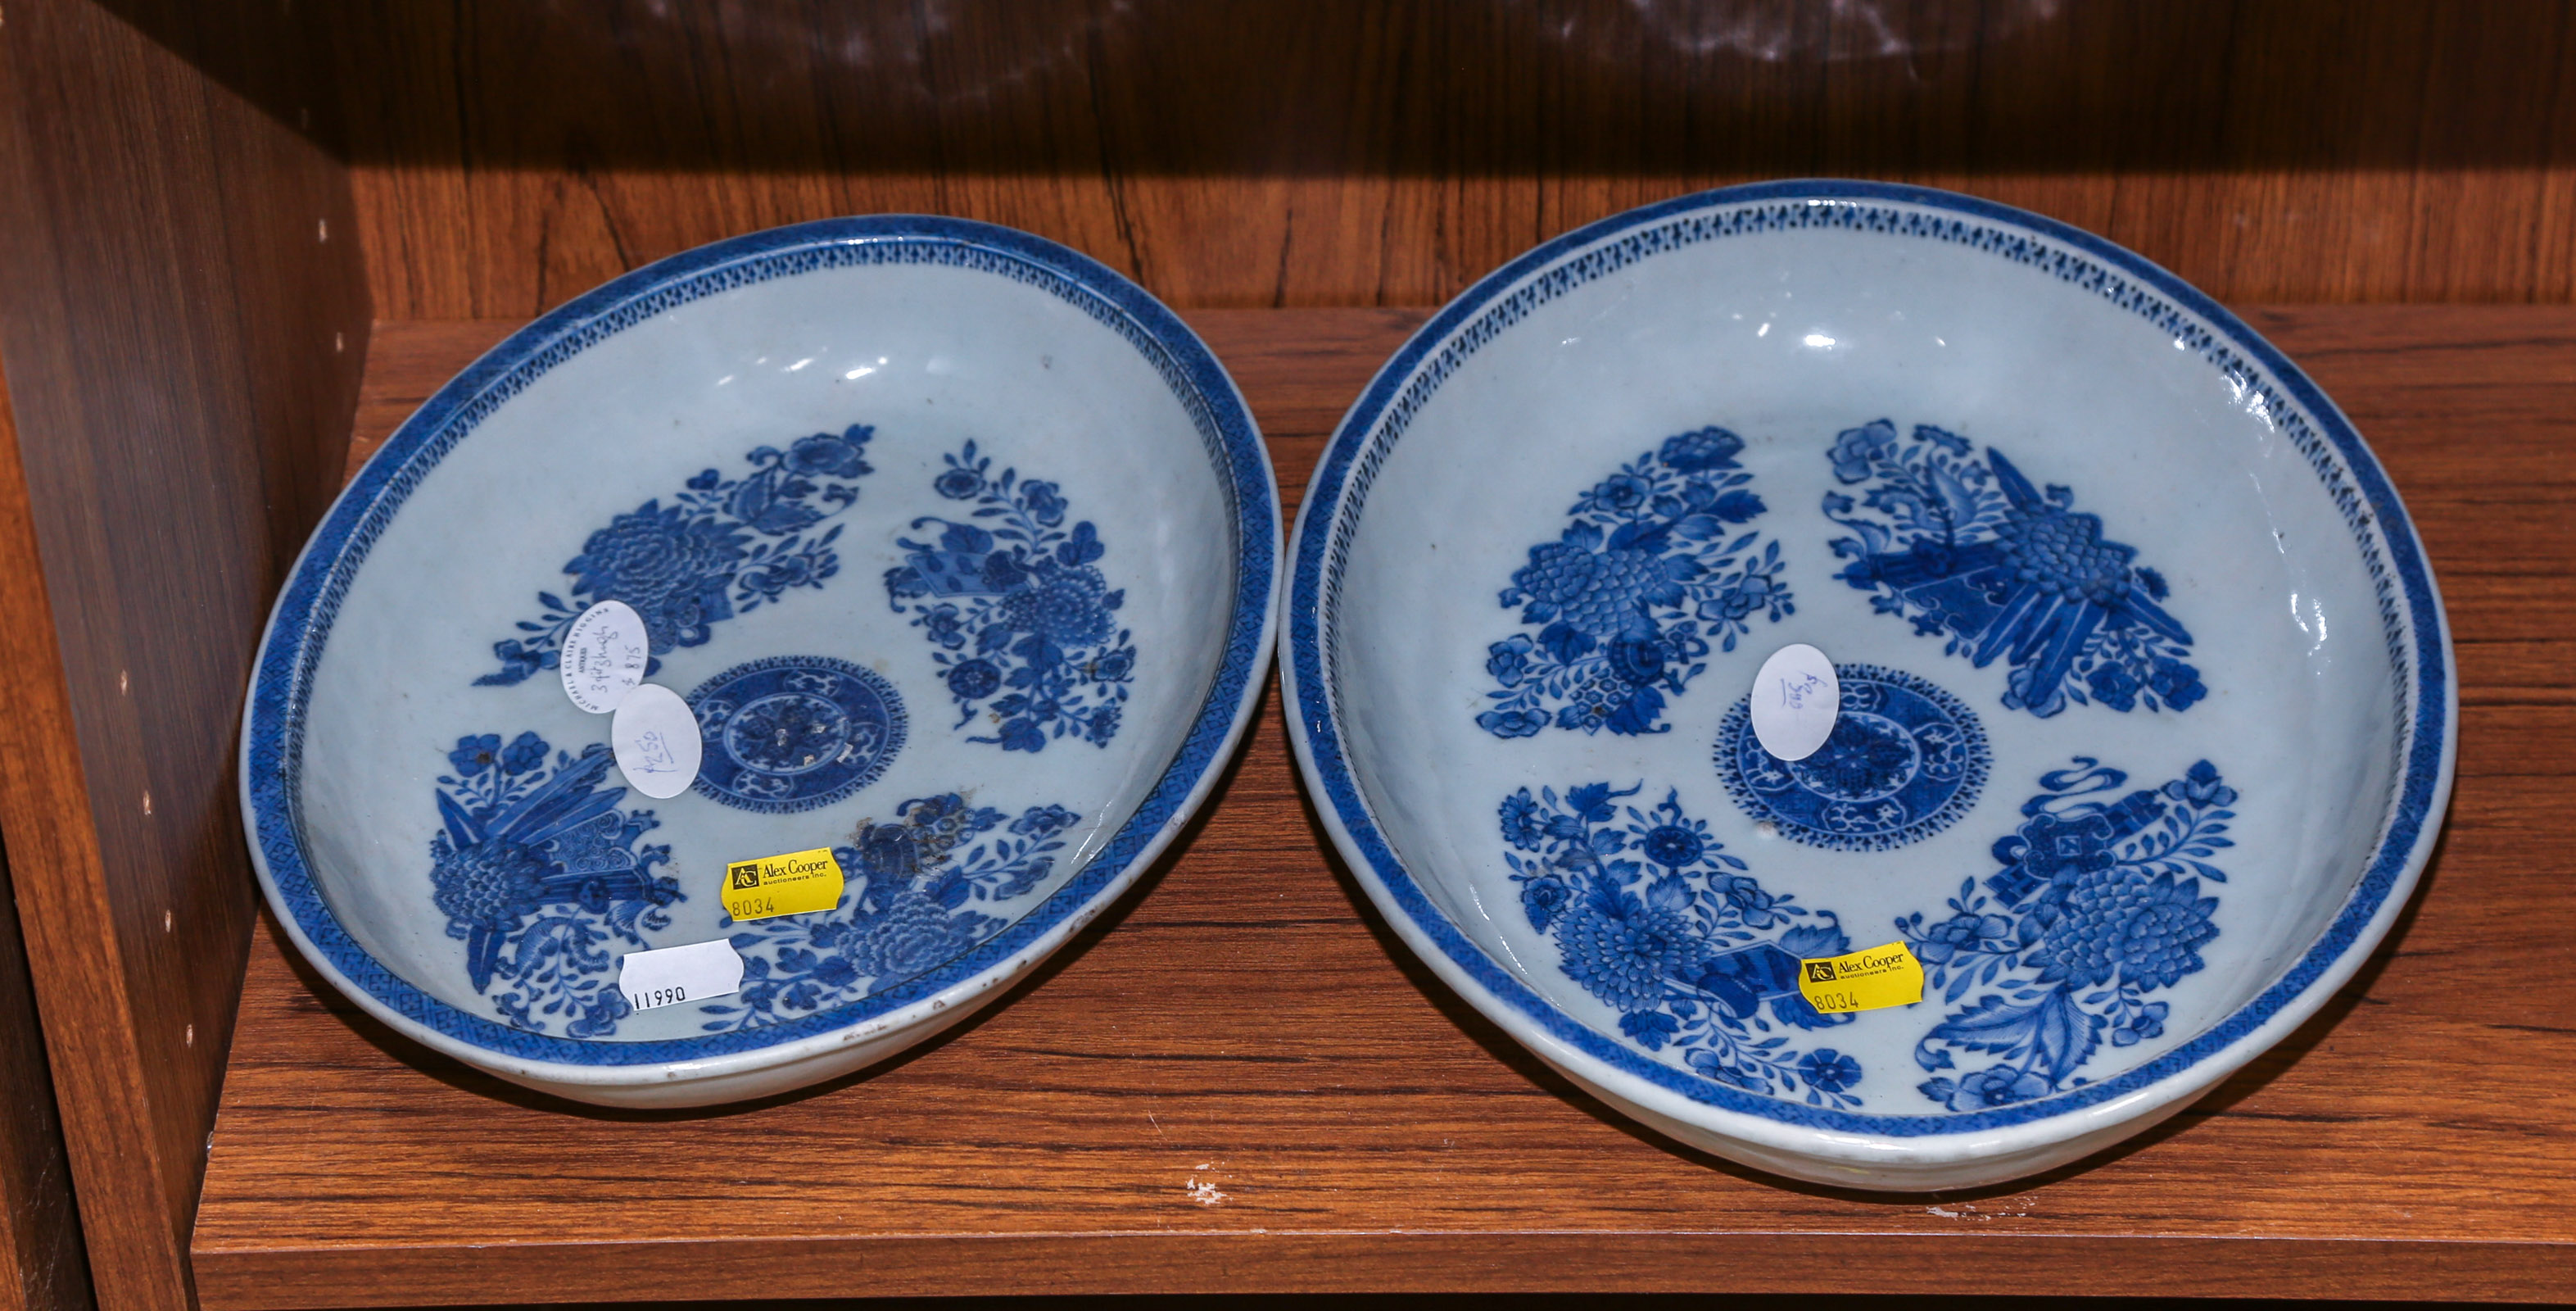 TWO CHINESE EXPORT FITZHUGH PLATTERS